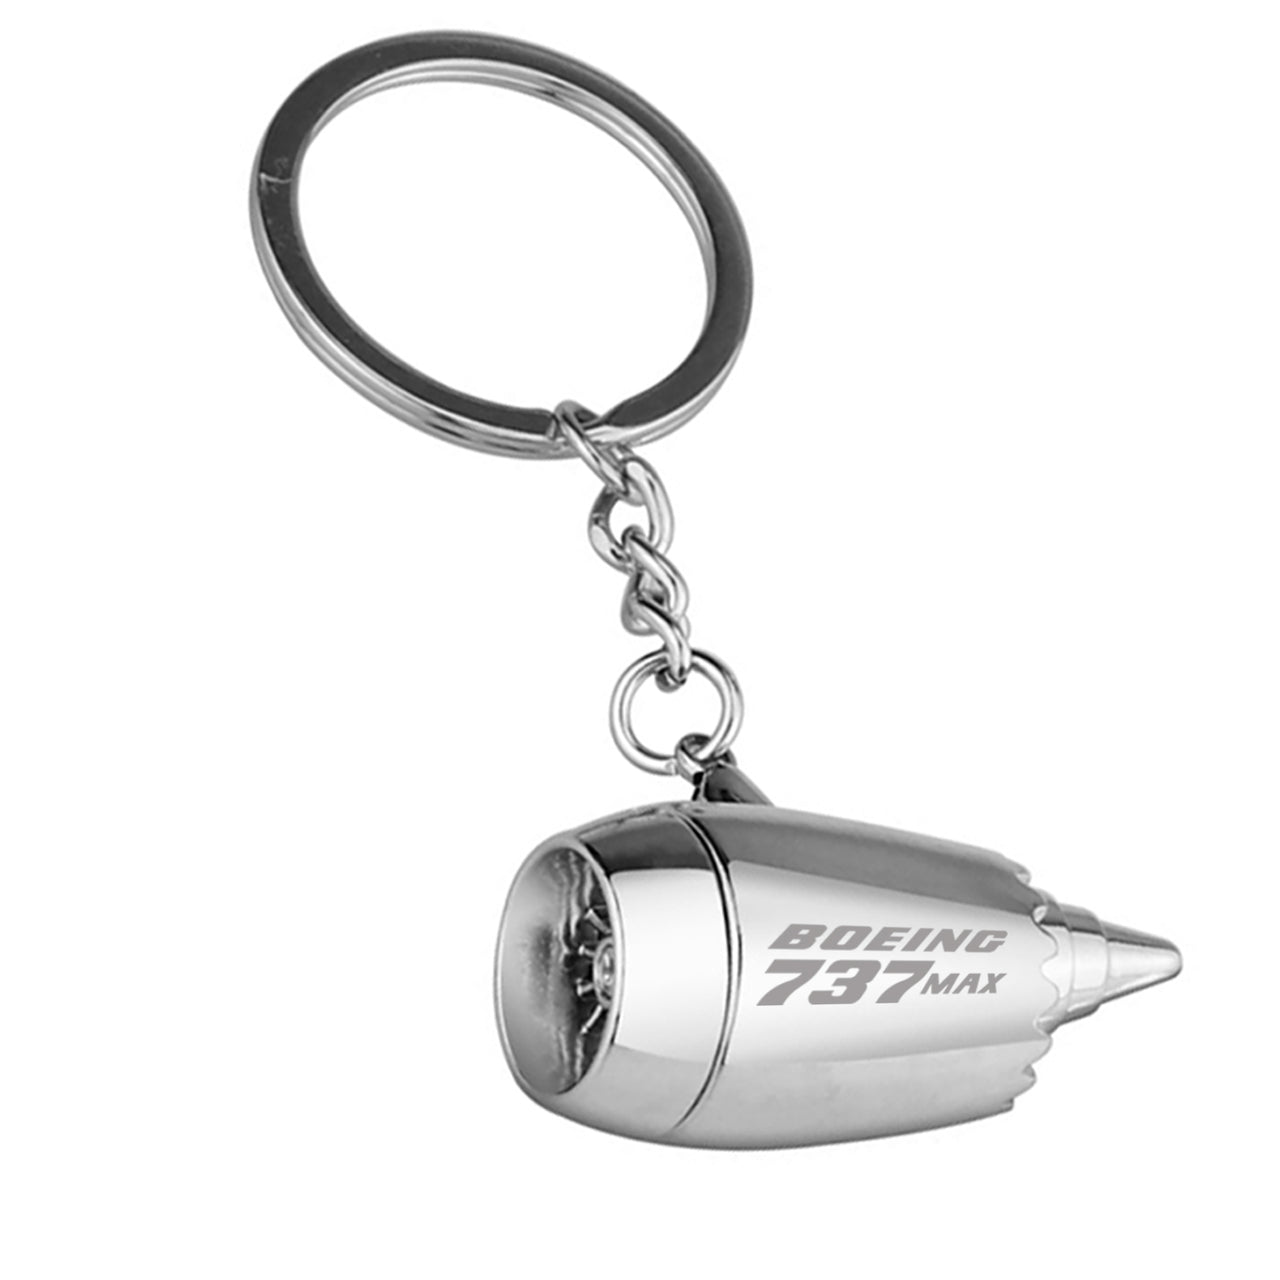 The Boeing 737Max Designed Airplane Jet Engine Shaped Key Chain